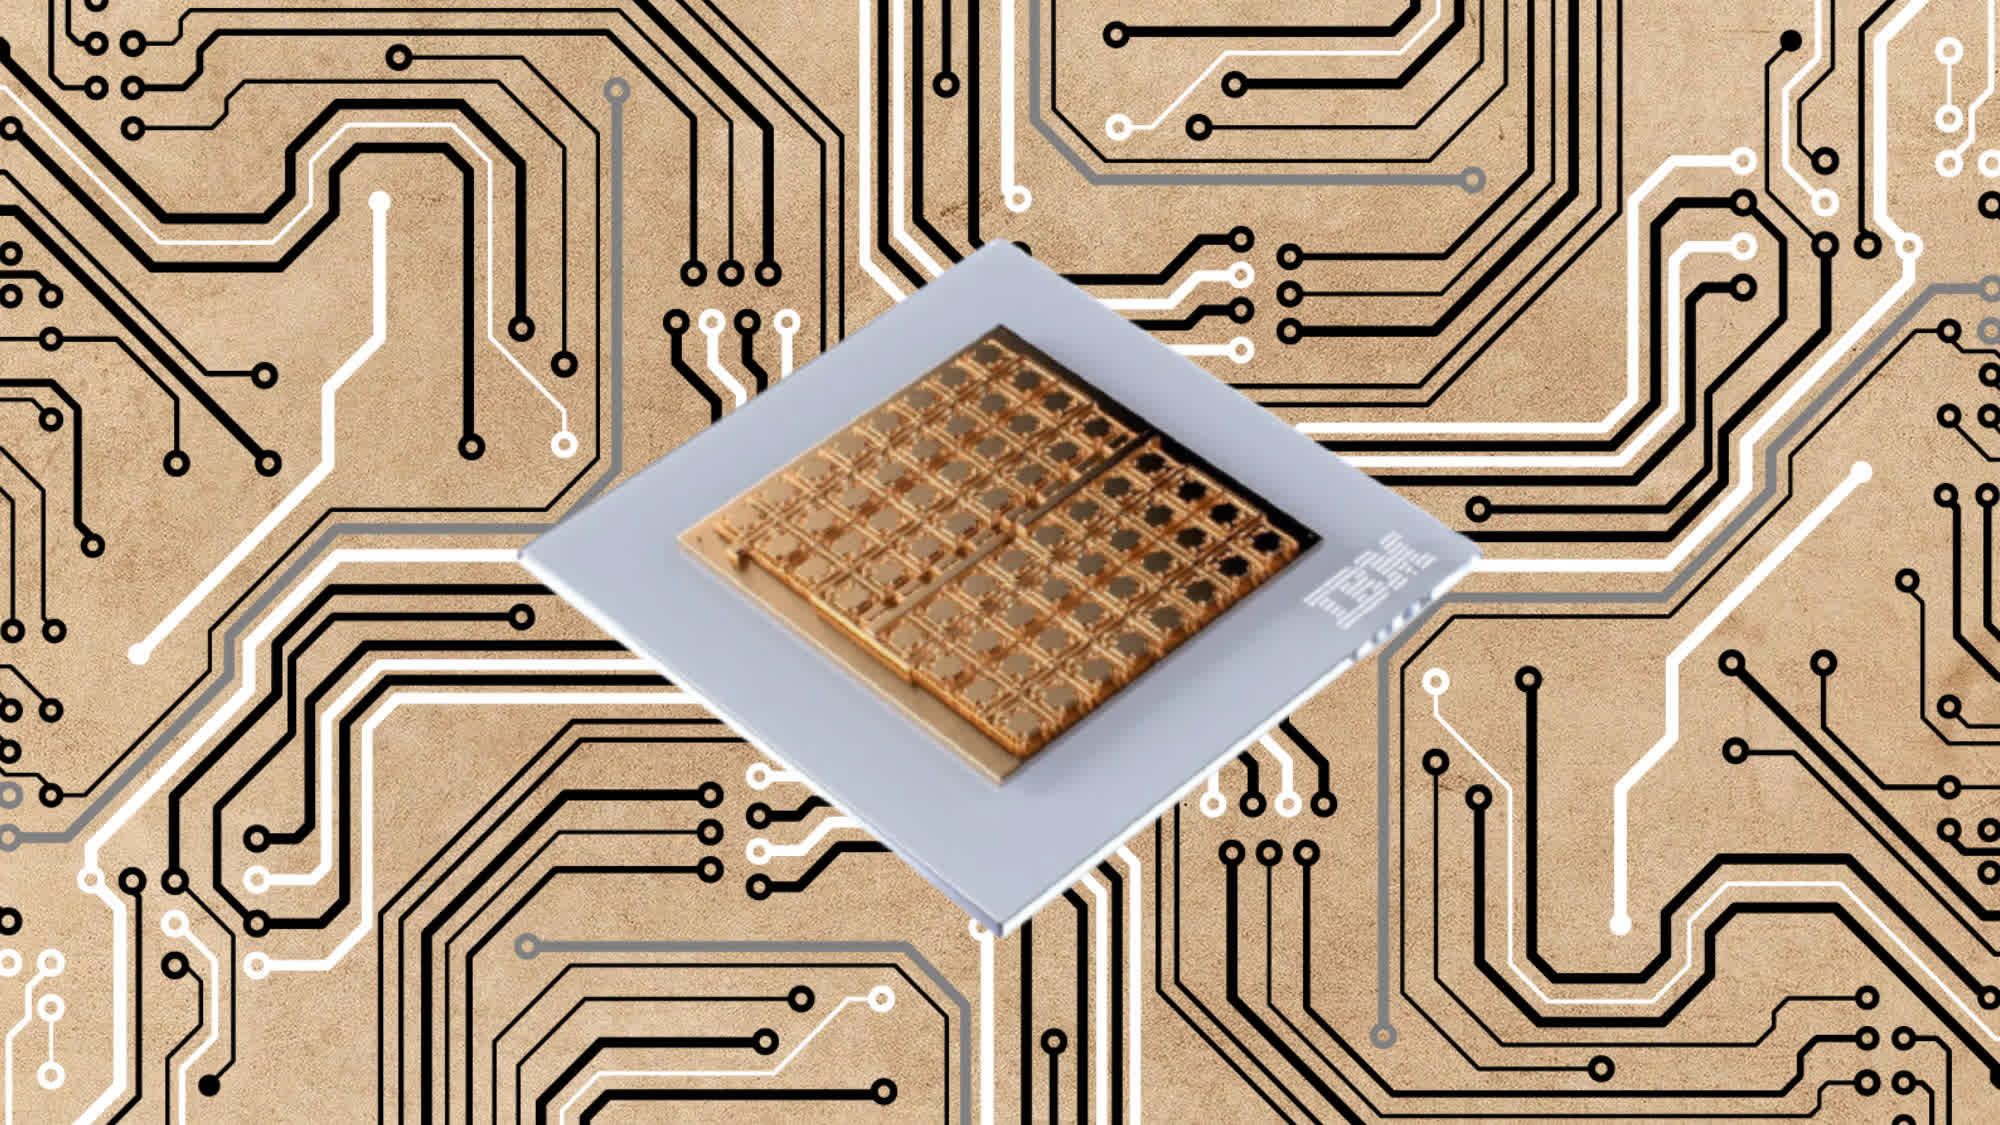 IBM's new analog AI chip is more efficient than power-hungry GPUs